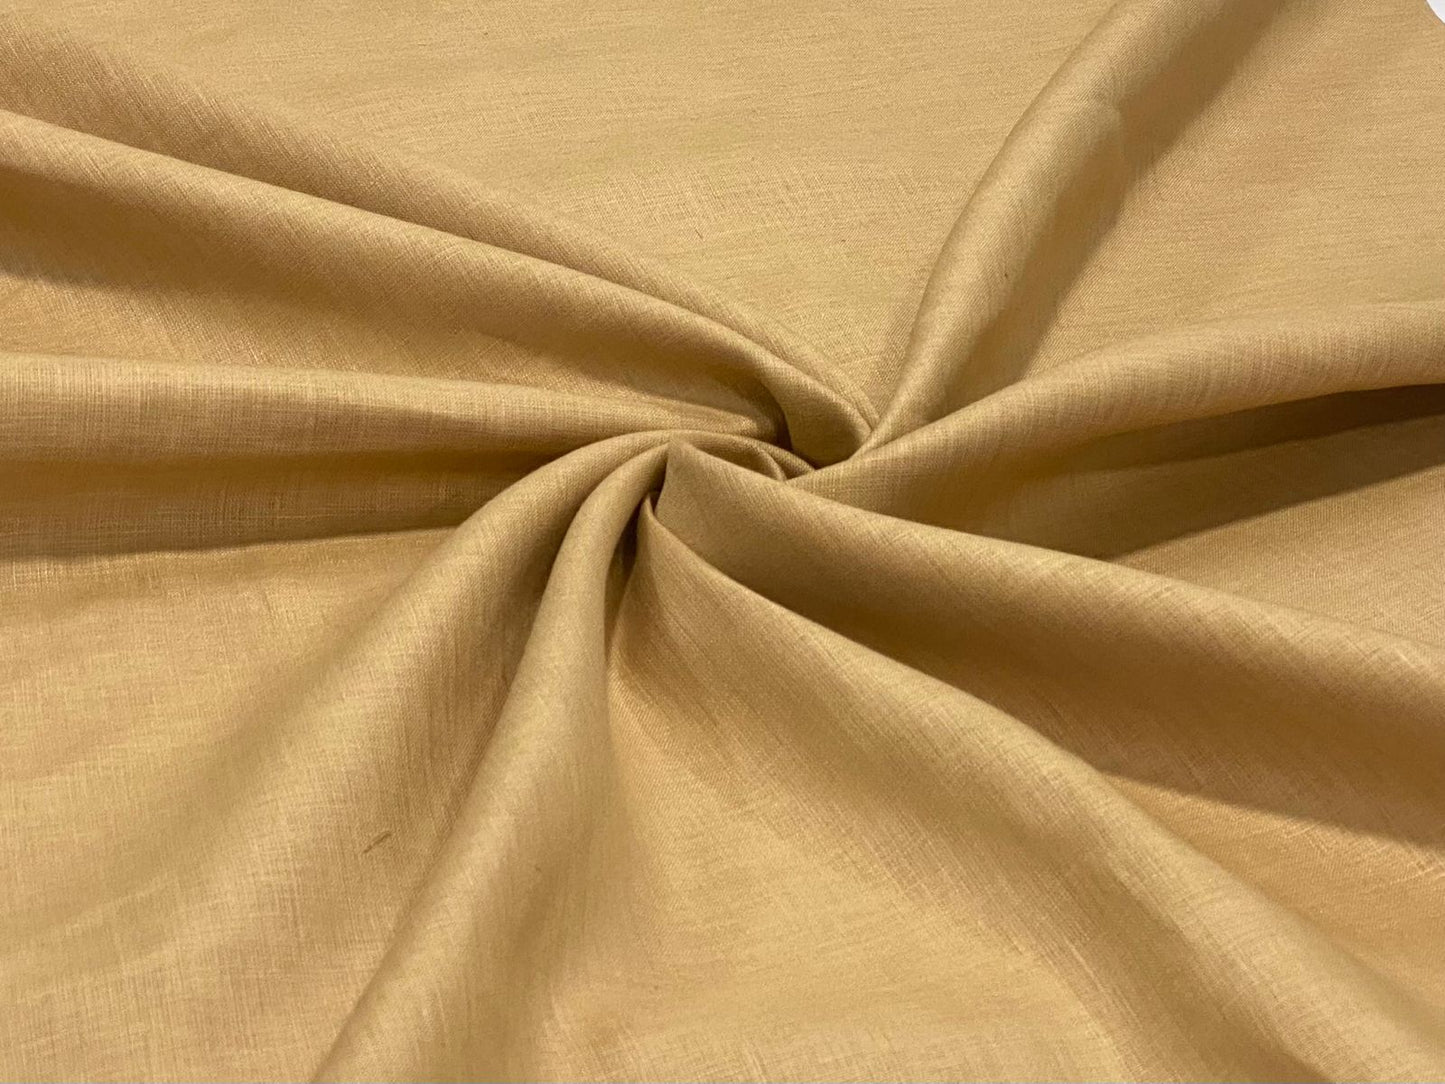 Sand Brown Solid Colour- Dyed Premium Linen Fabric LO-122